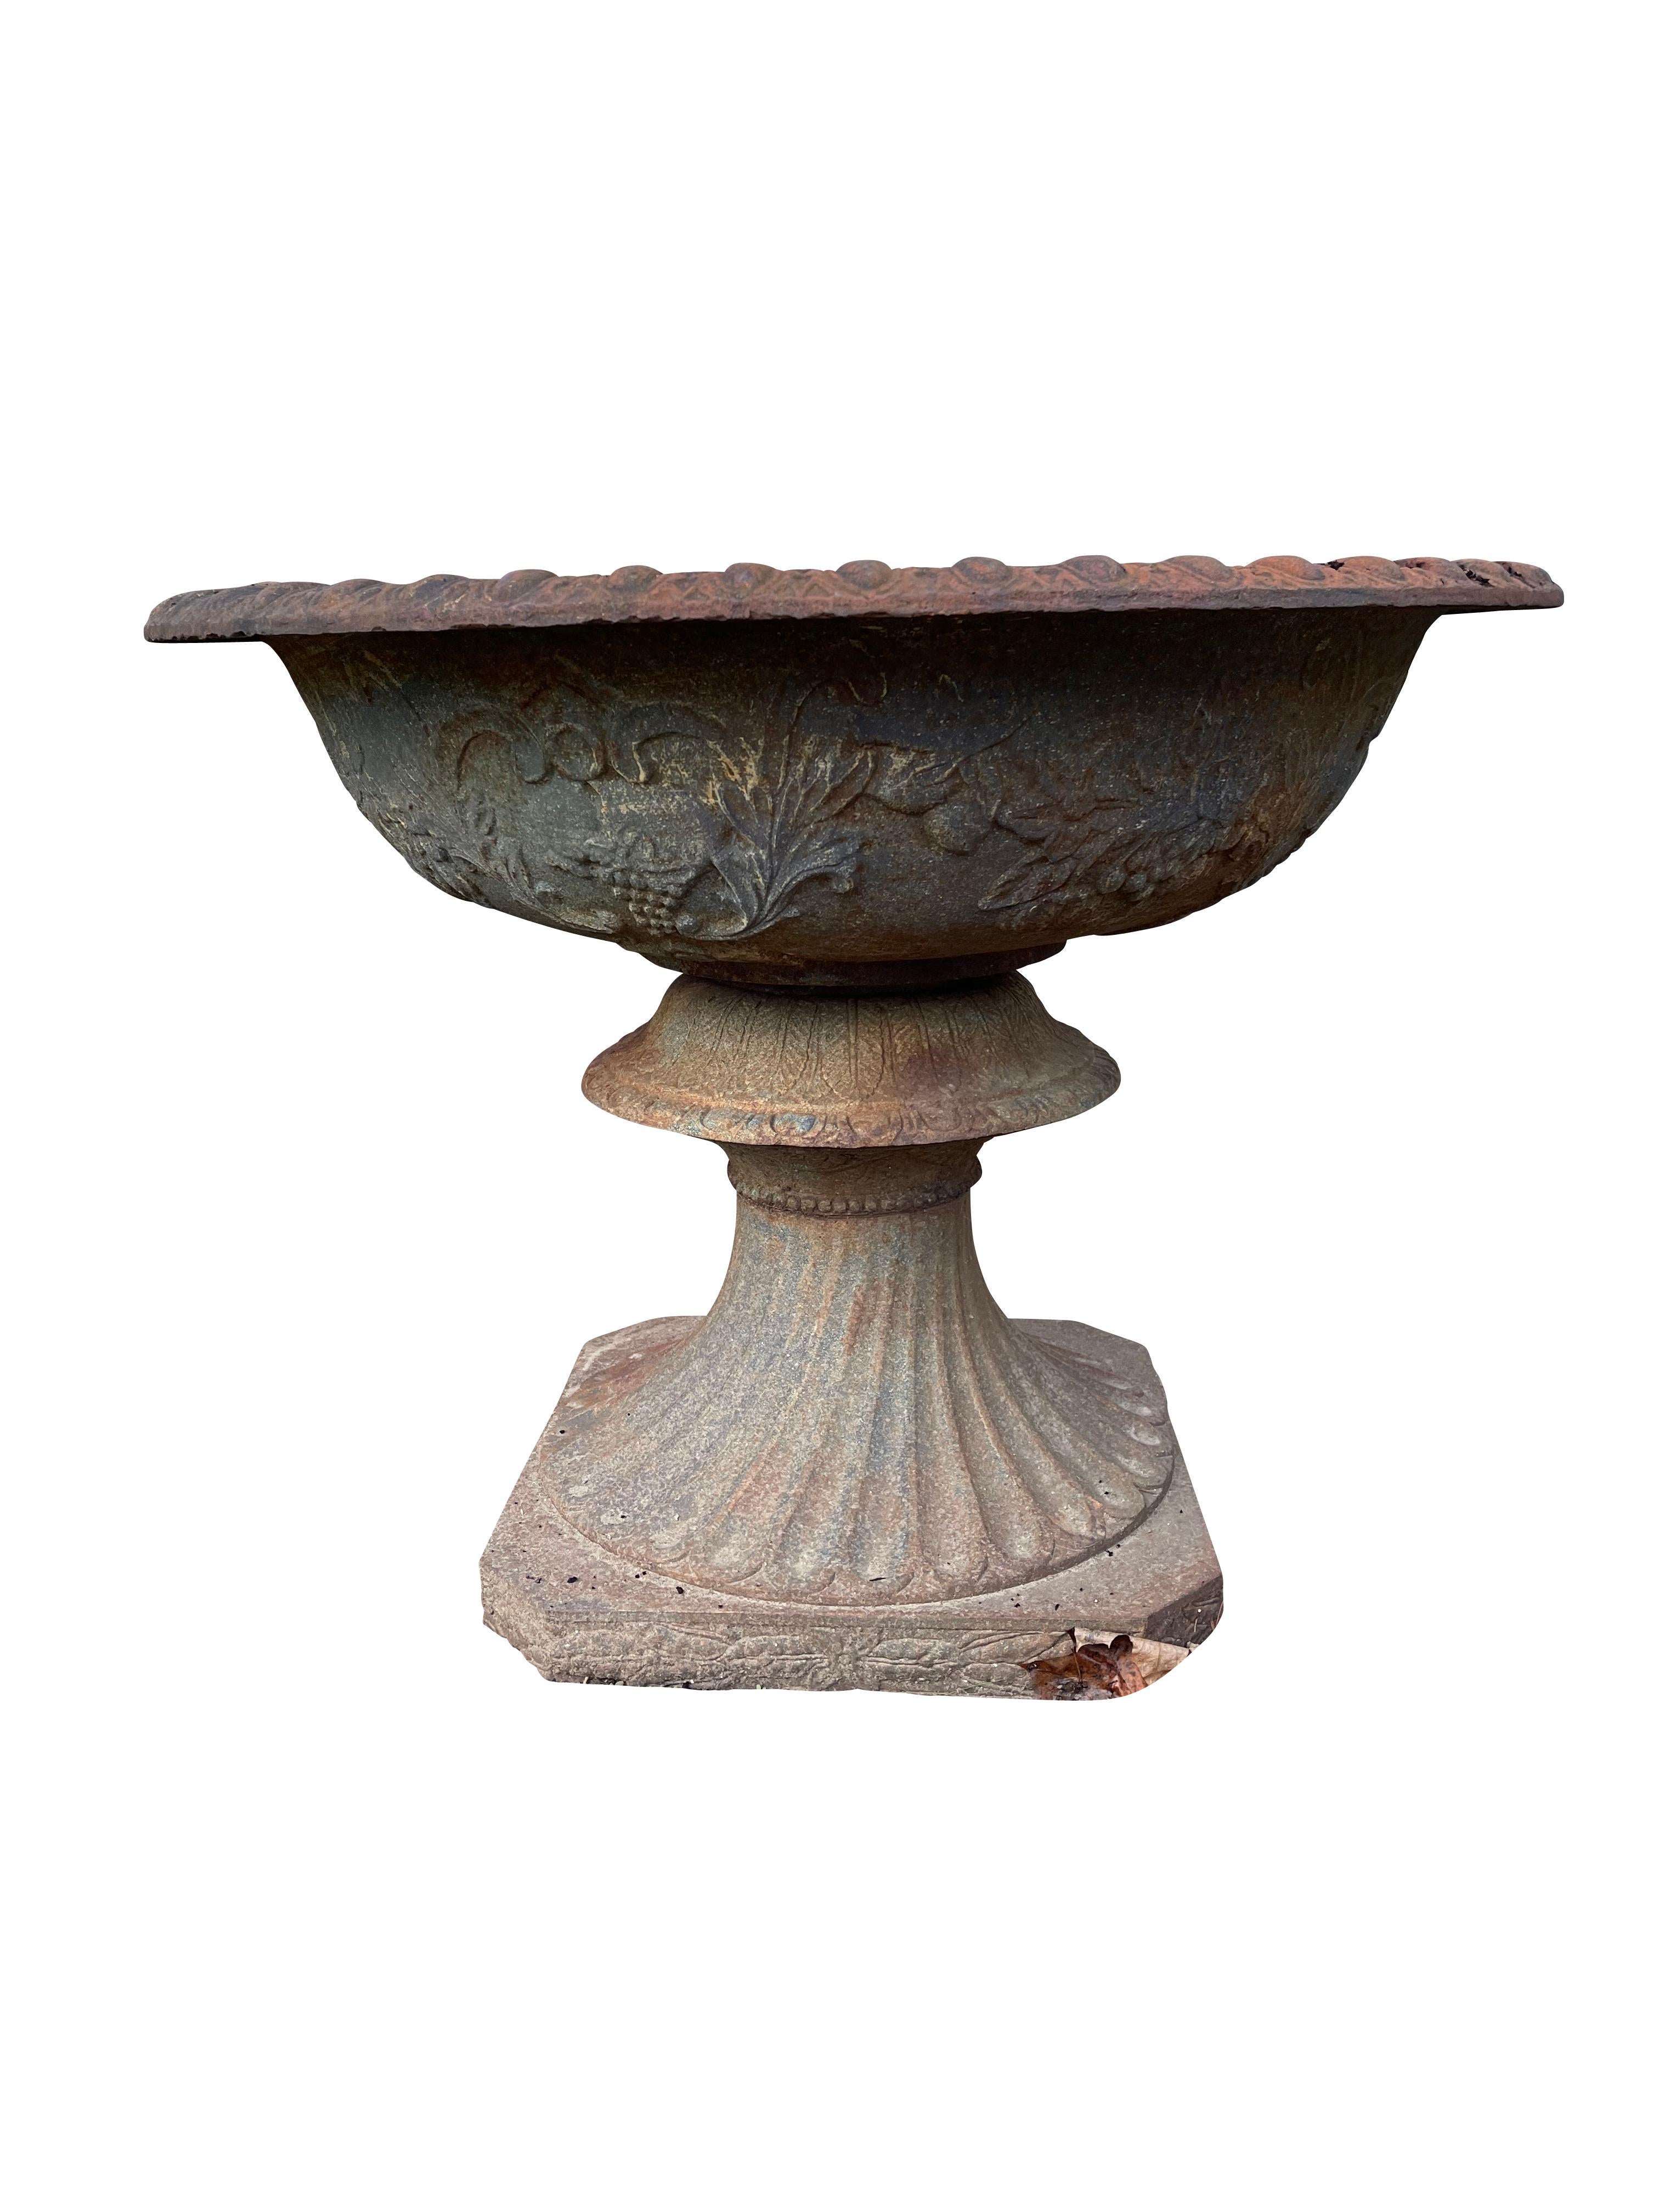 Neoclassical  Cast Iron Urns with Foliate and Grape Design For Sale